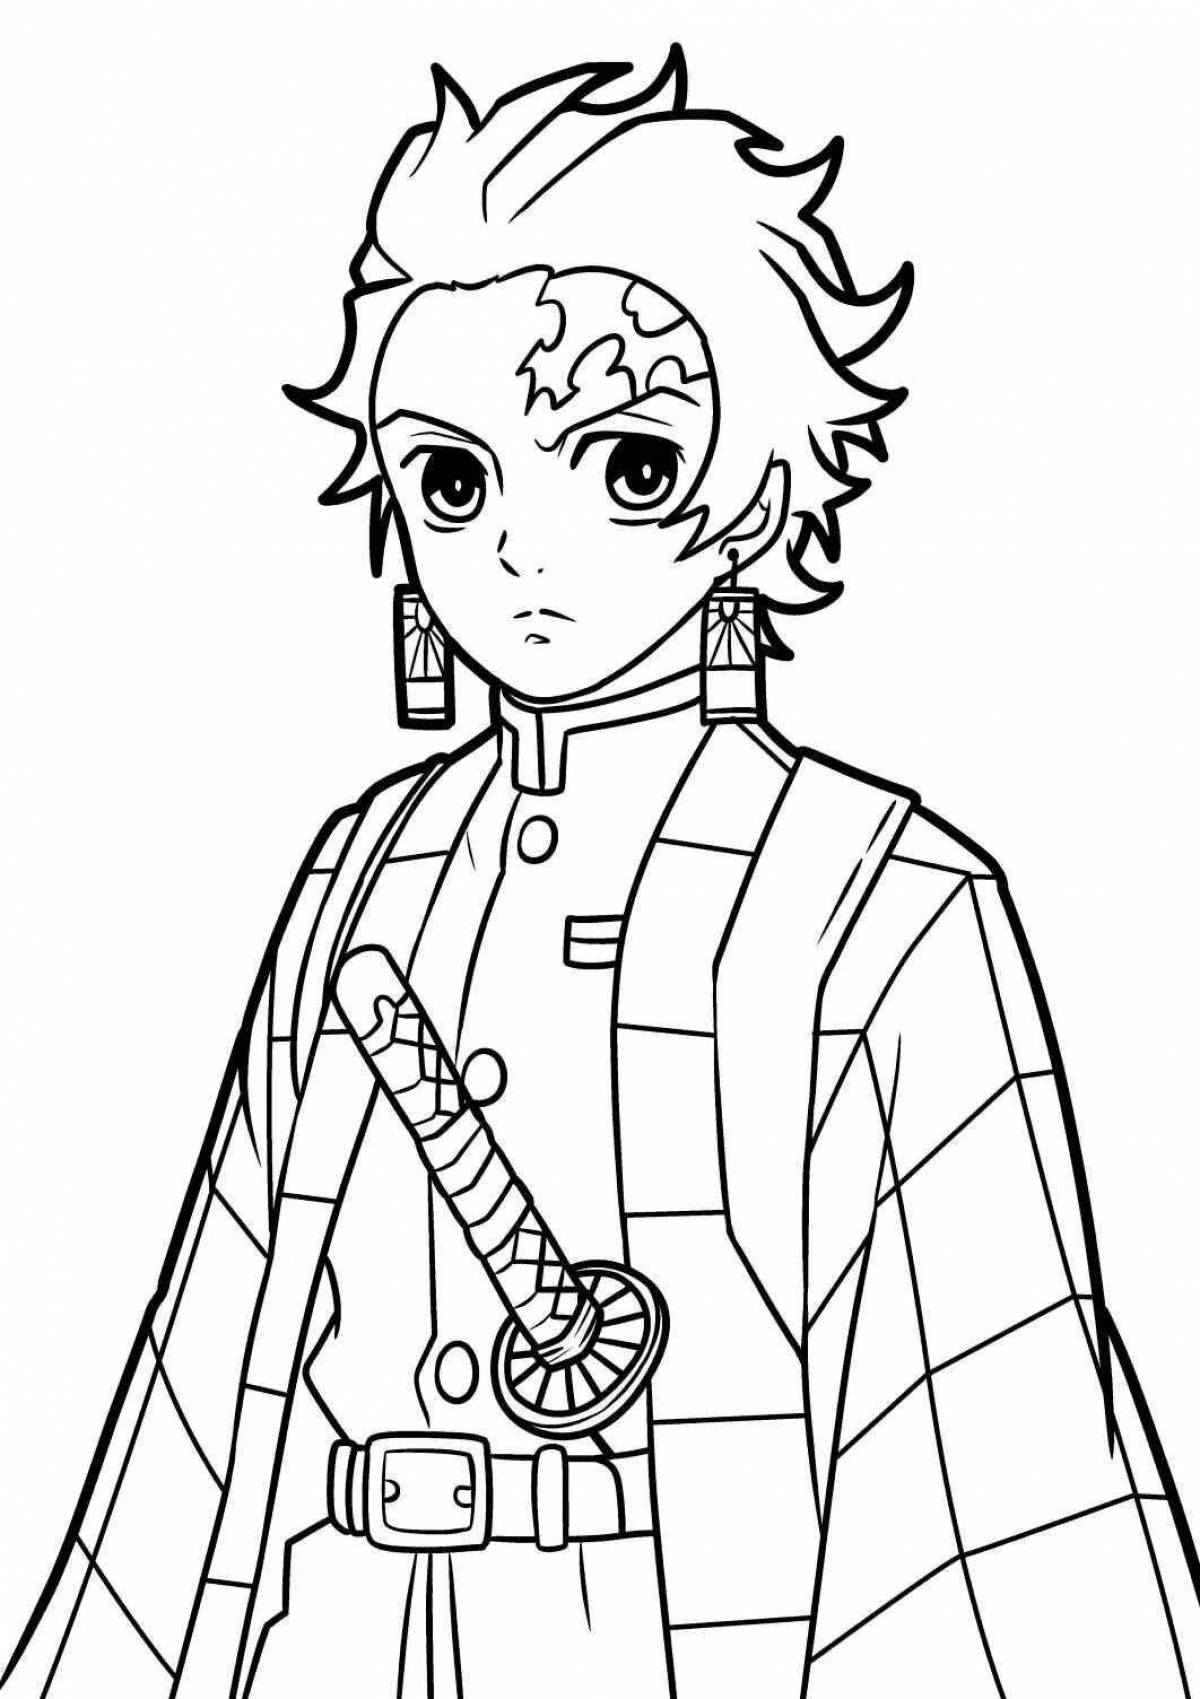 Tanjiro shiny demon cleaver coloring page